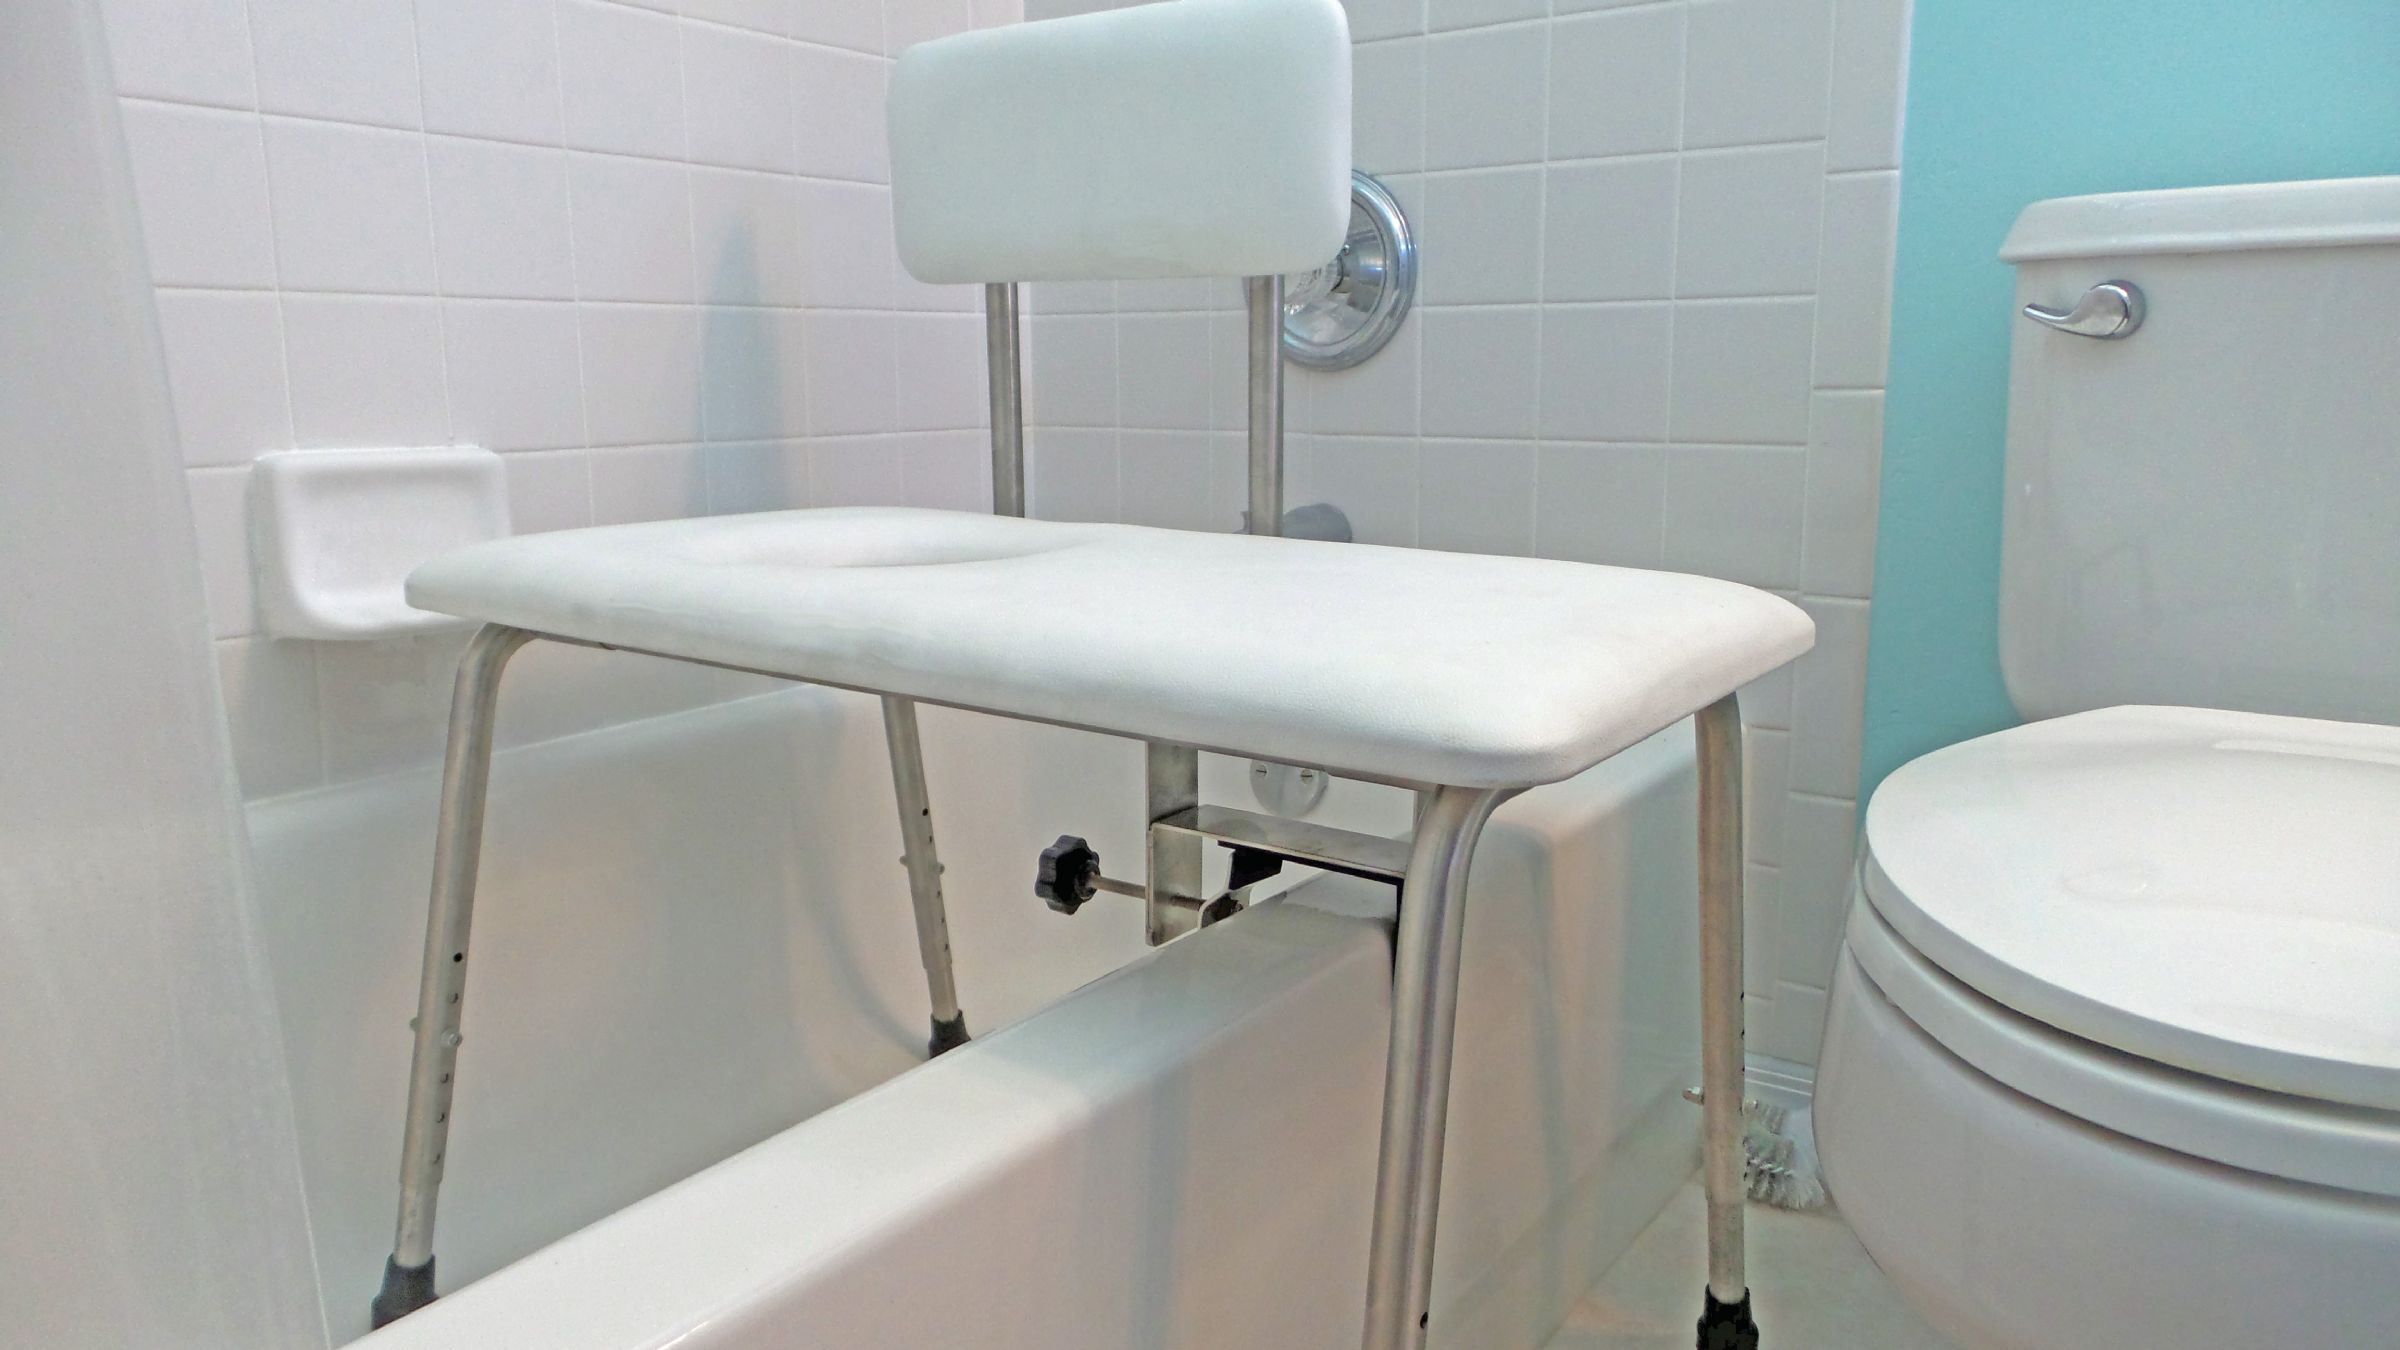 ADA Compliant Portable Commode Shower Bench